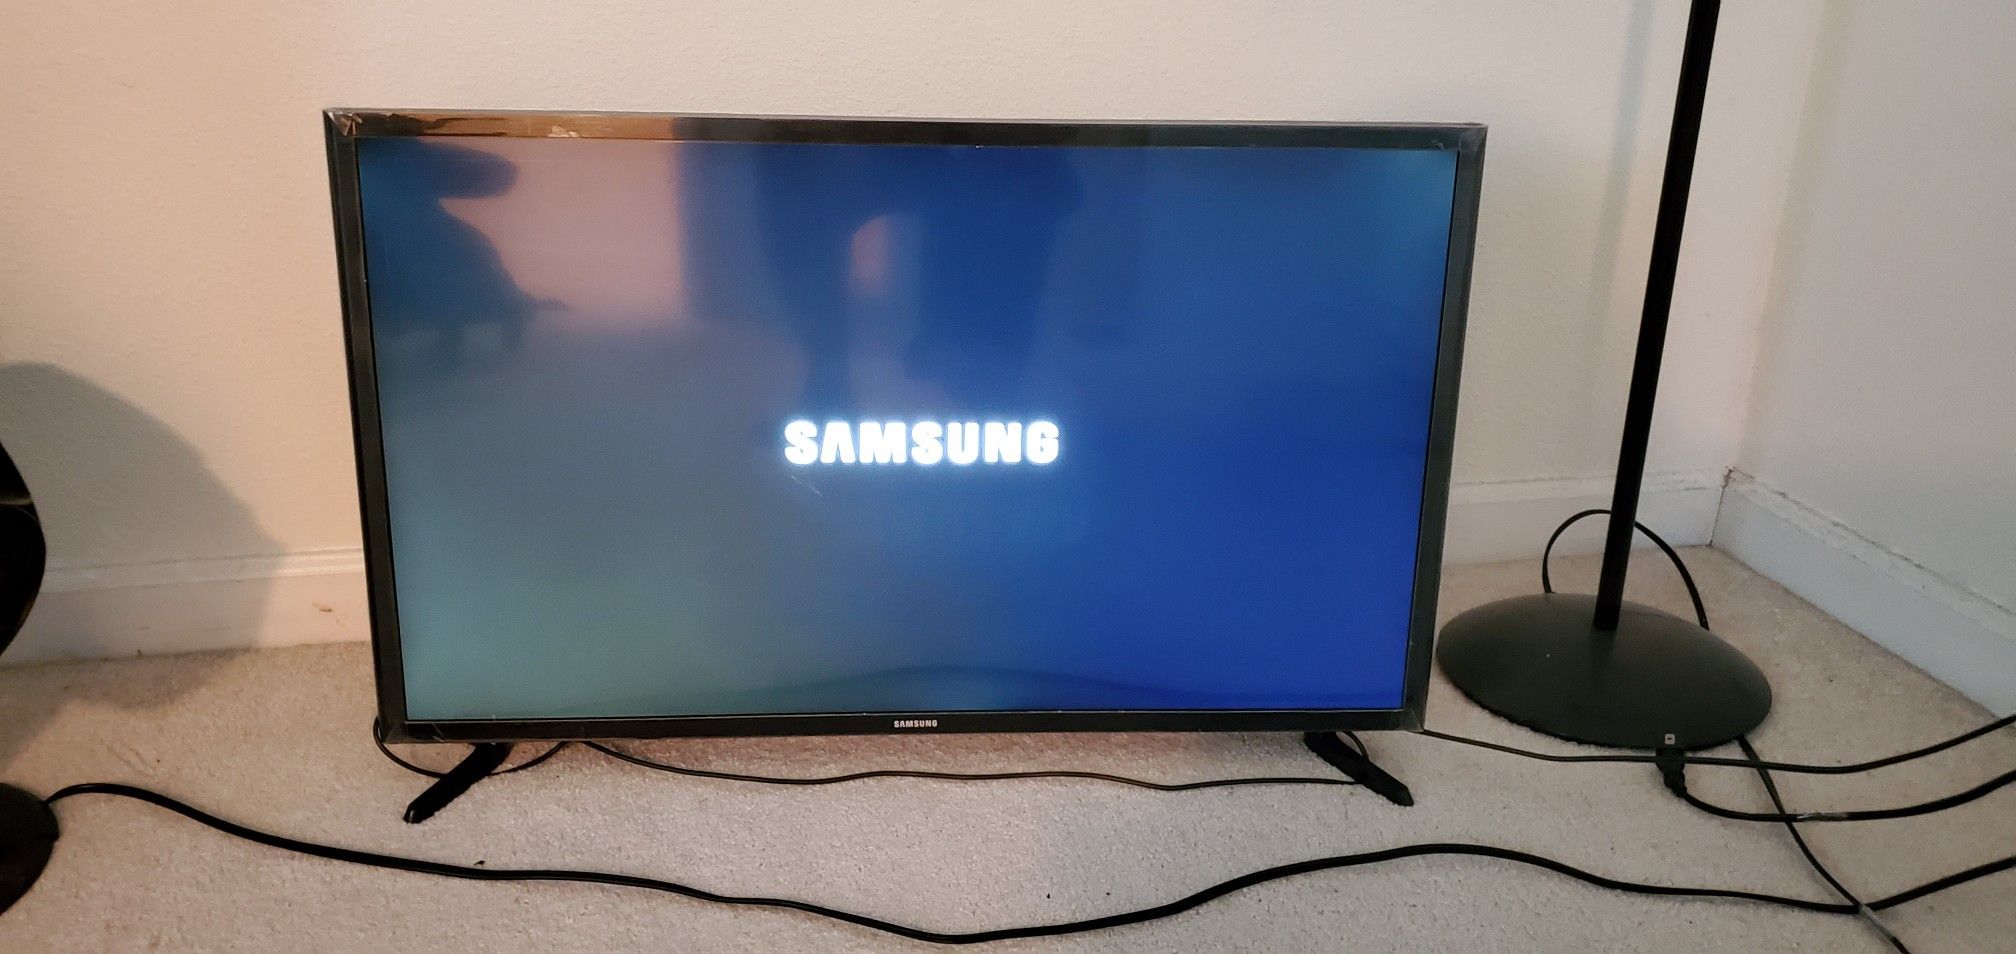 Samsung TV 32 inches